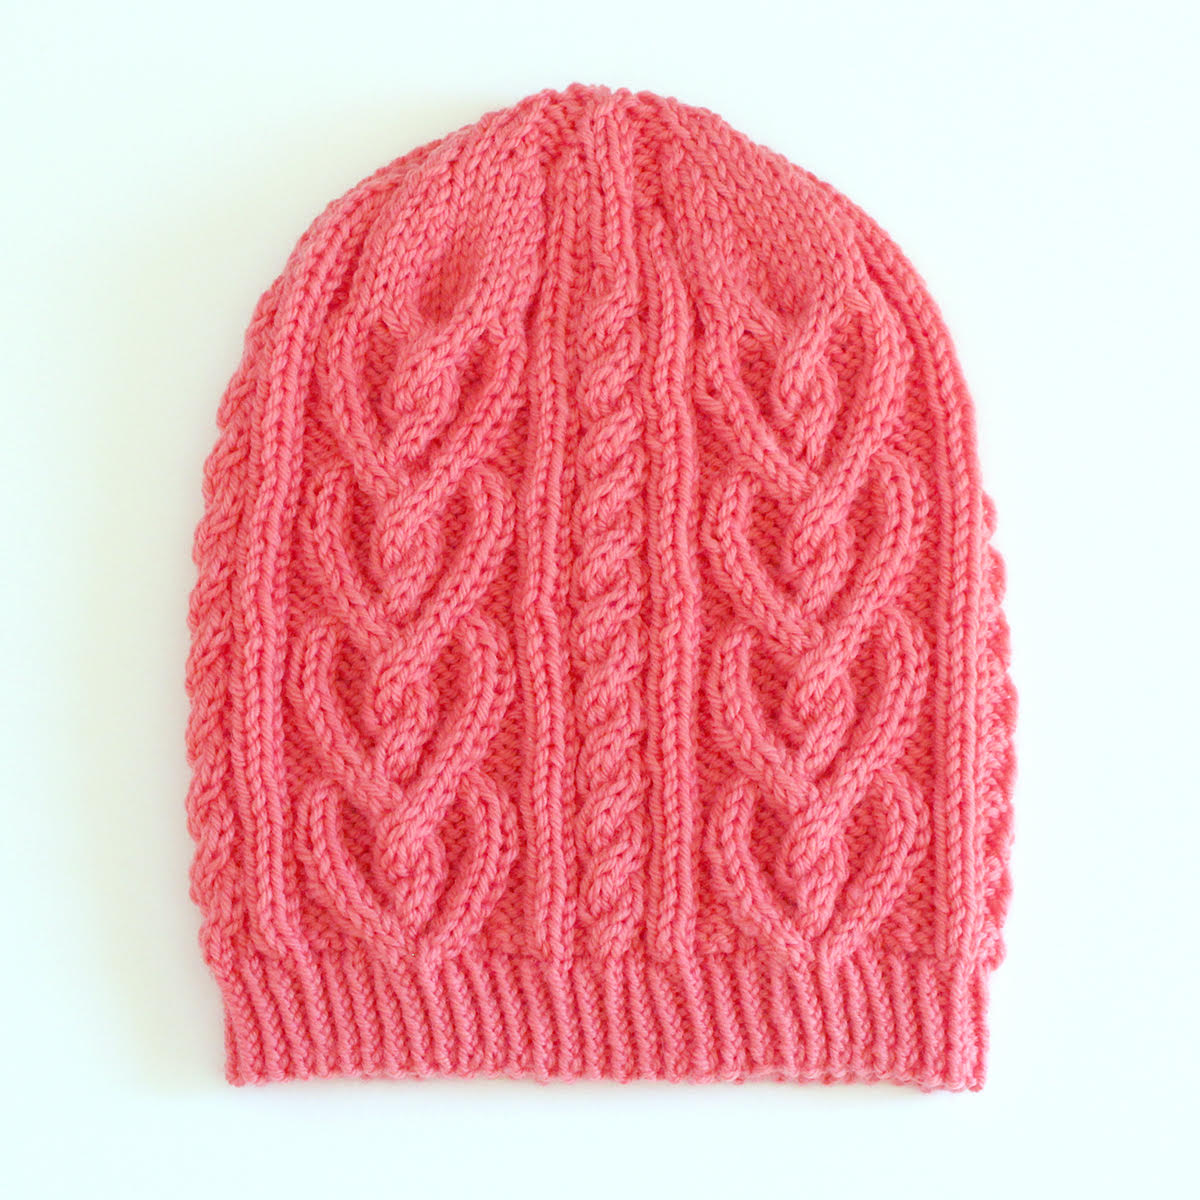 Twisted Love Heart Cable Hat PDF